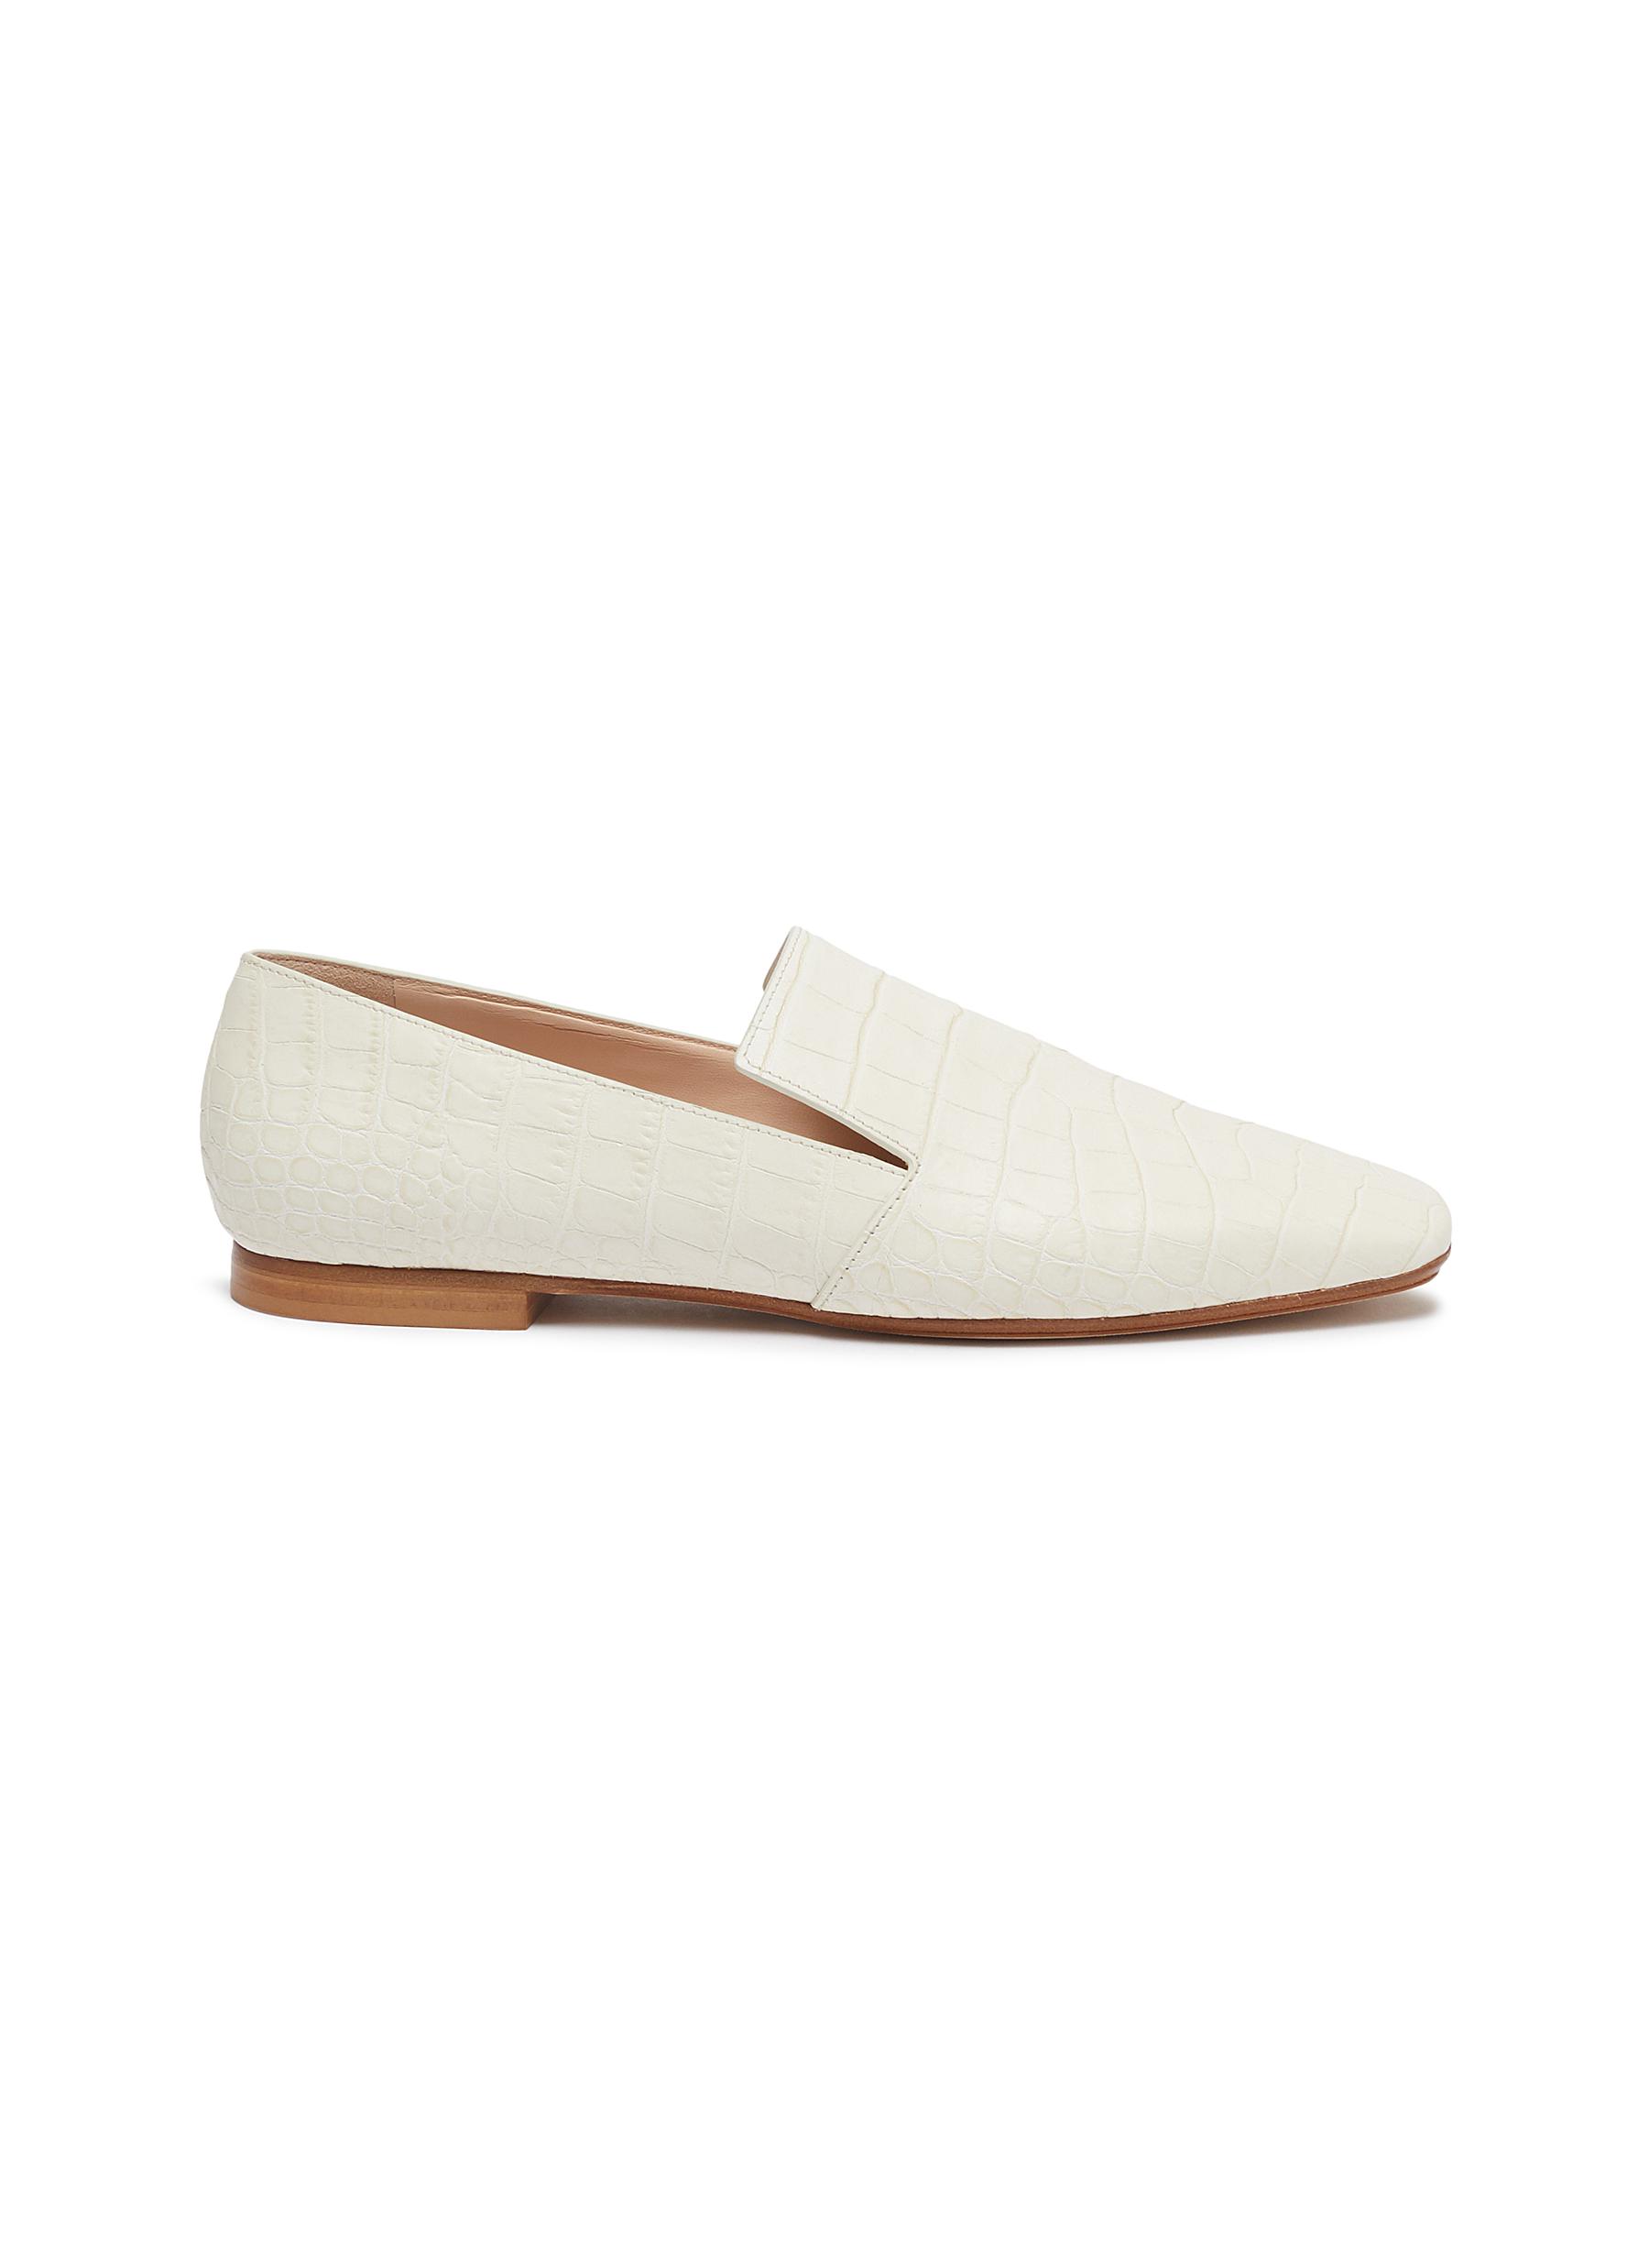 Rodo Flats Croc embossed leather loafers